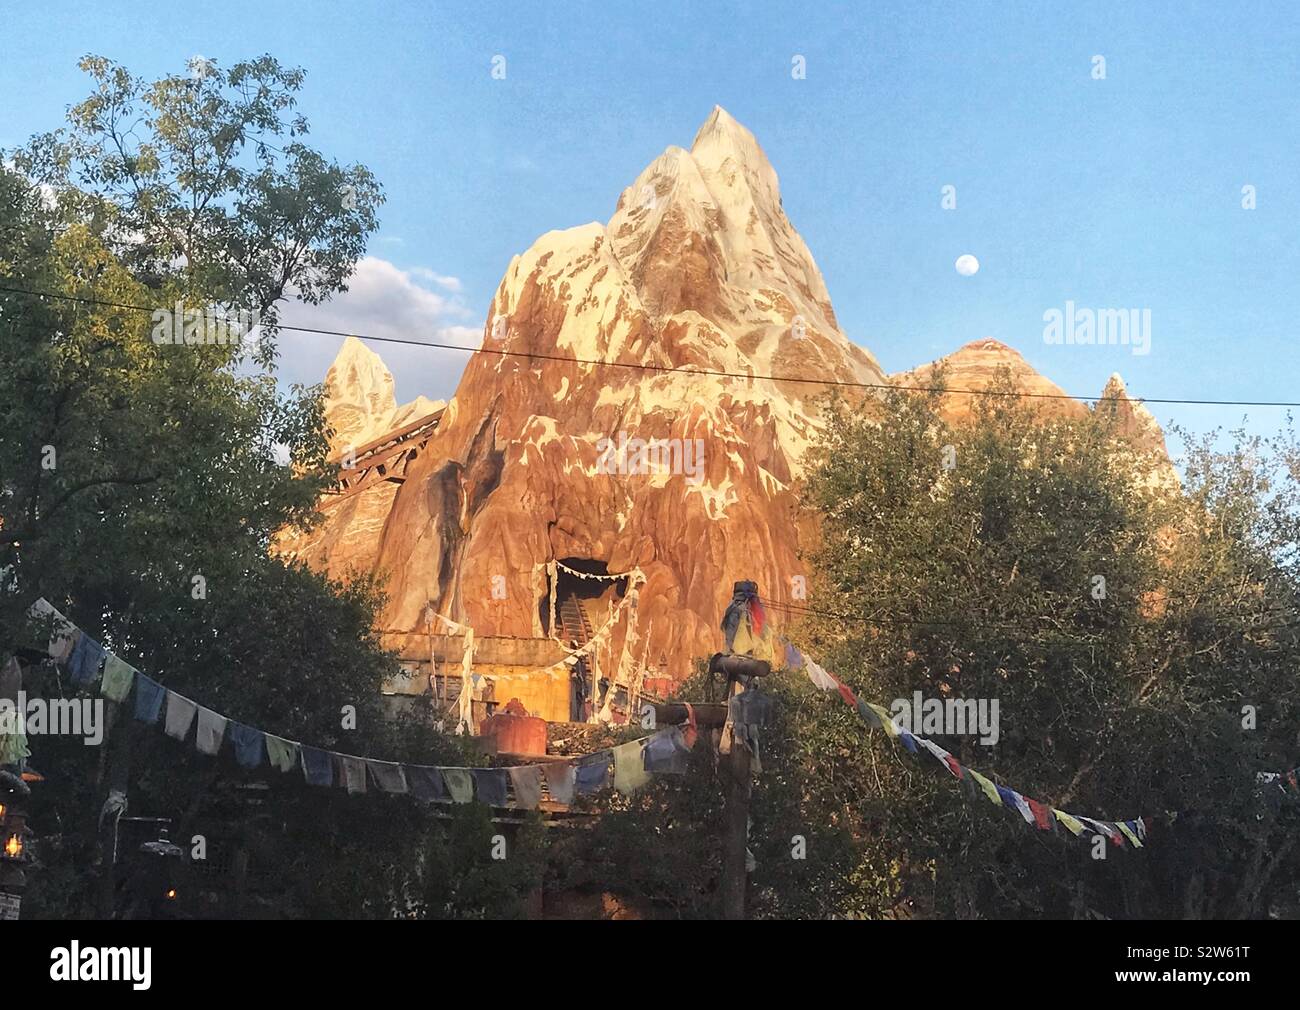 Expedition Everest Rollercoaster with the Moon above At Disney’s Animal Kingdom - Orlando, Florida USA Stock Photo